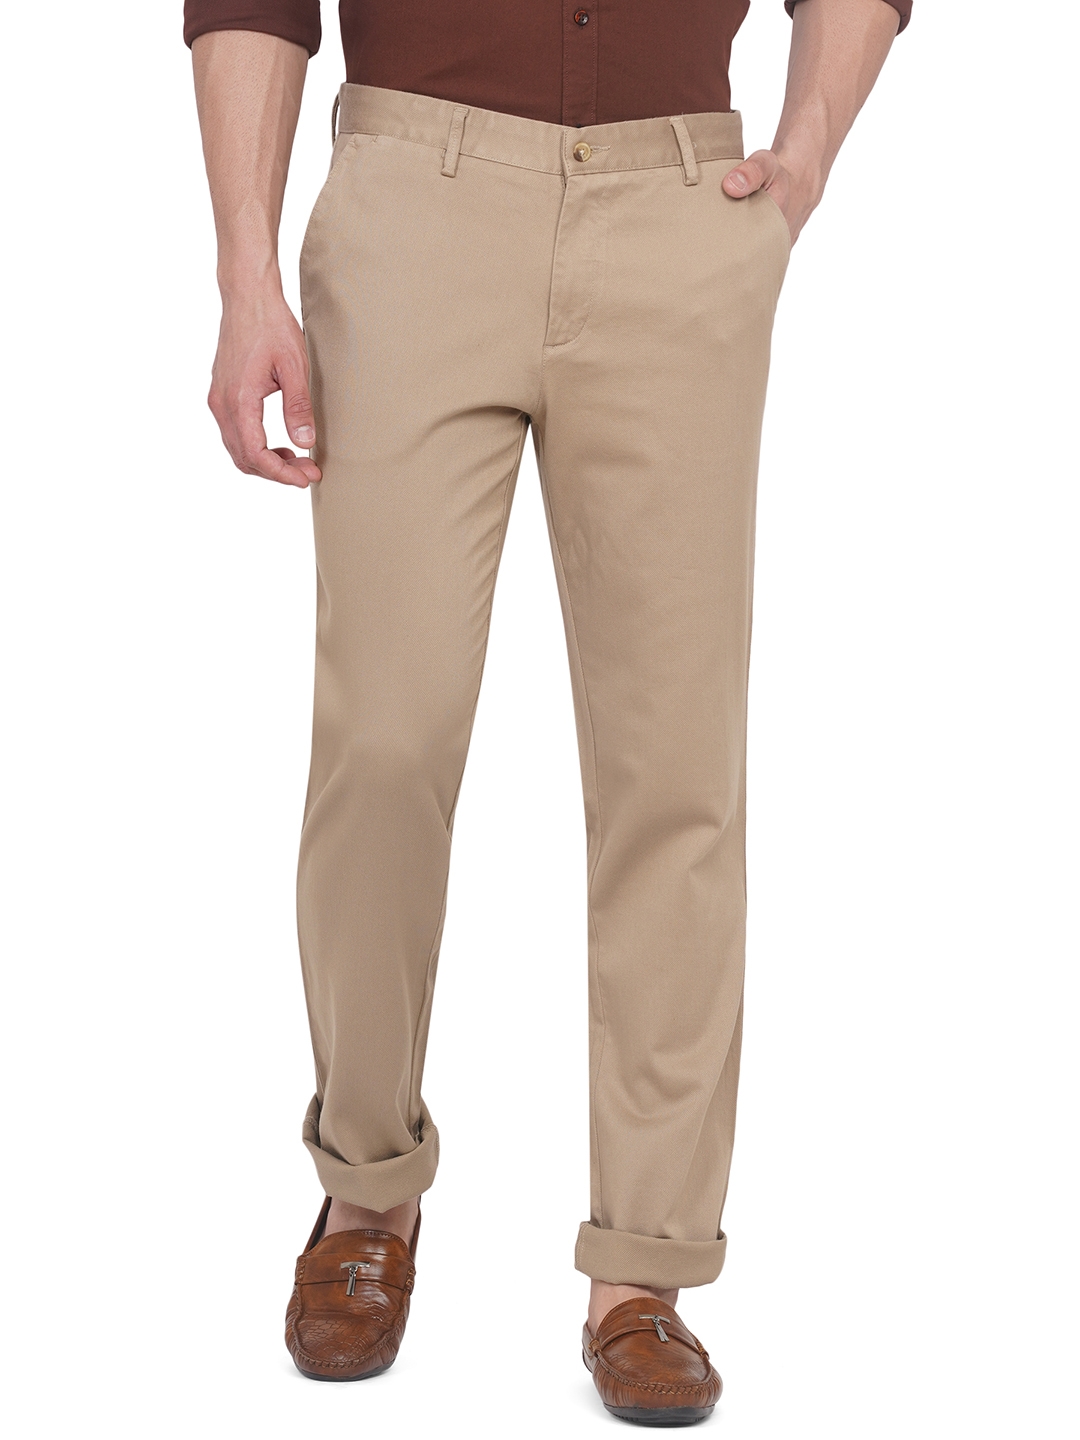 Greenfibre | Light Khaki Solid Slim Fit Casual Trouser | Greenfibre 0